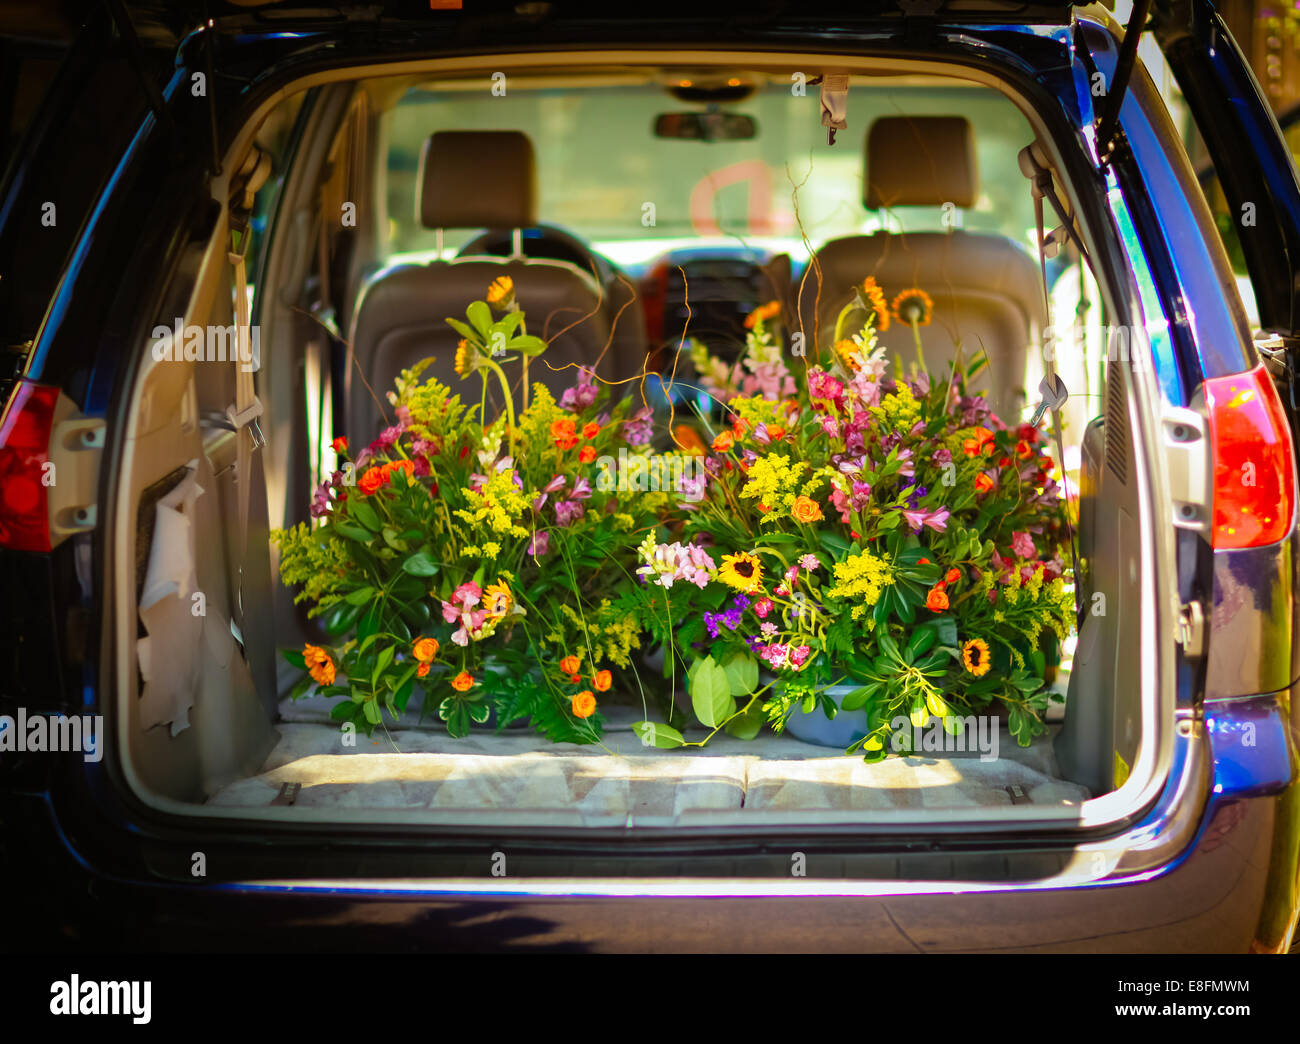 Car Trunk With Flowers Stock Vector Illustration and Royalty Free Car Trunk  With Flowers Clipart